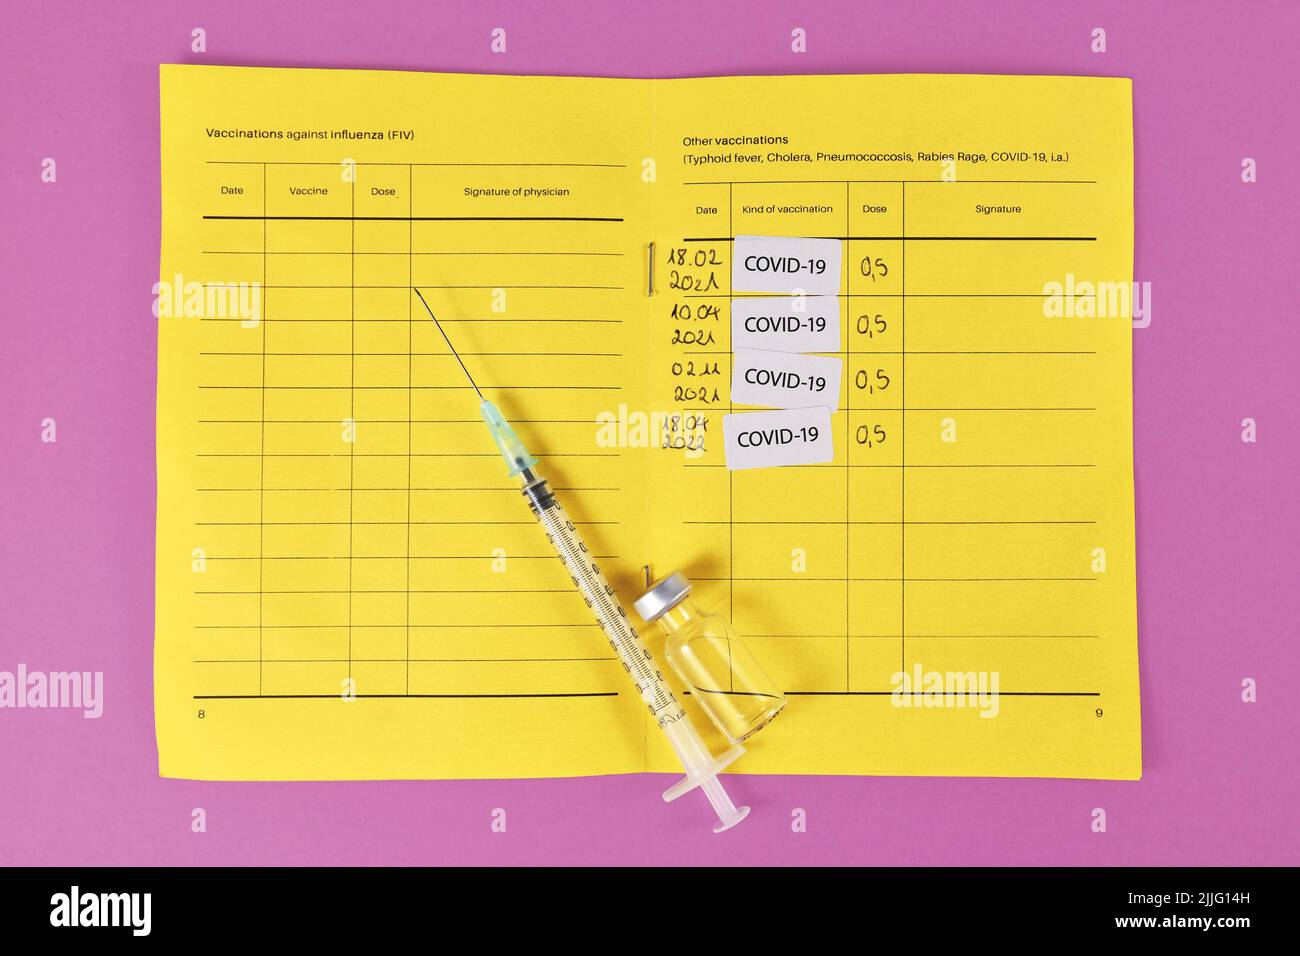 Concept for Corona virus booster vaccination showing vaccine passport with 4 entries Stock Photo